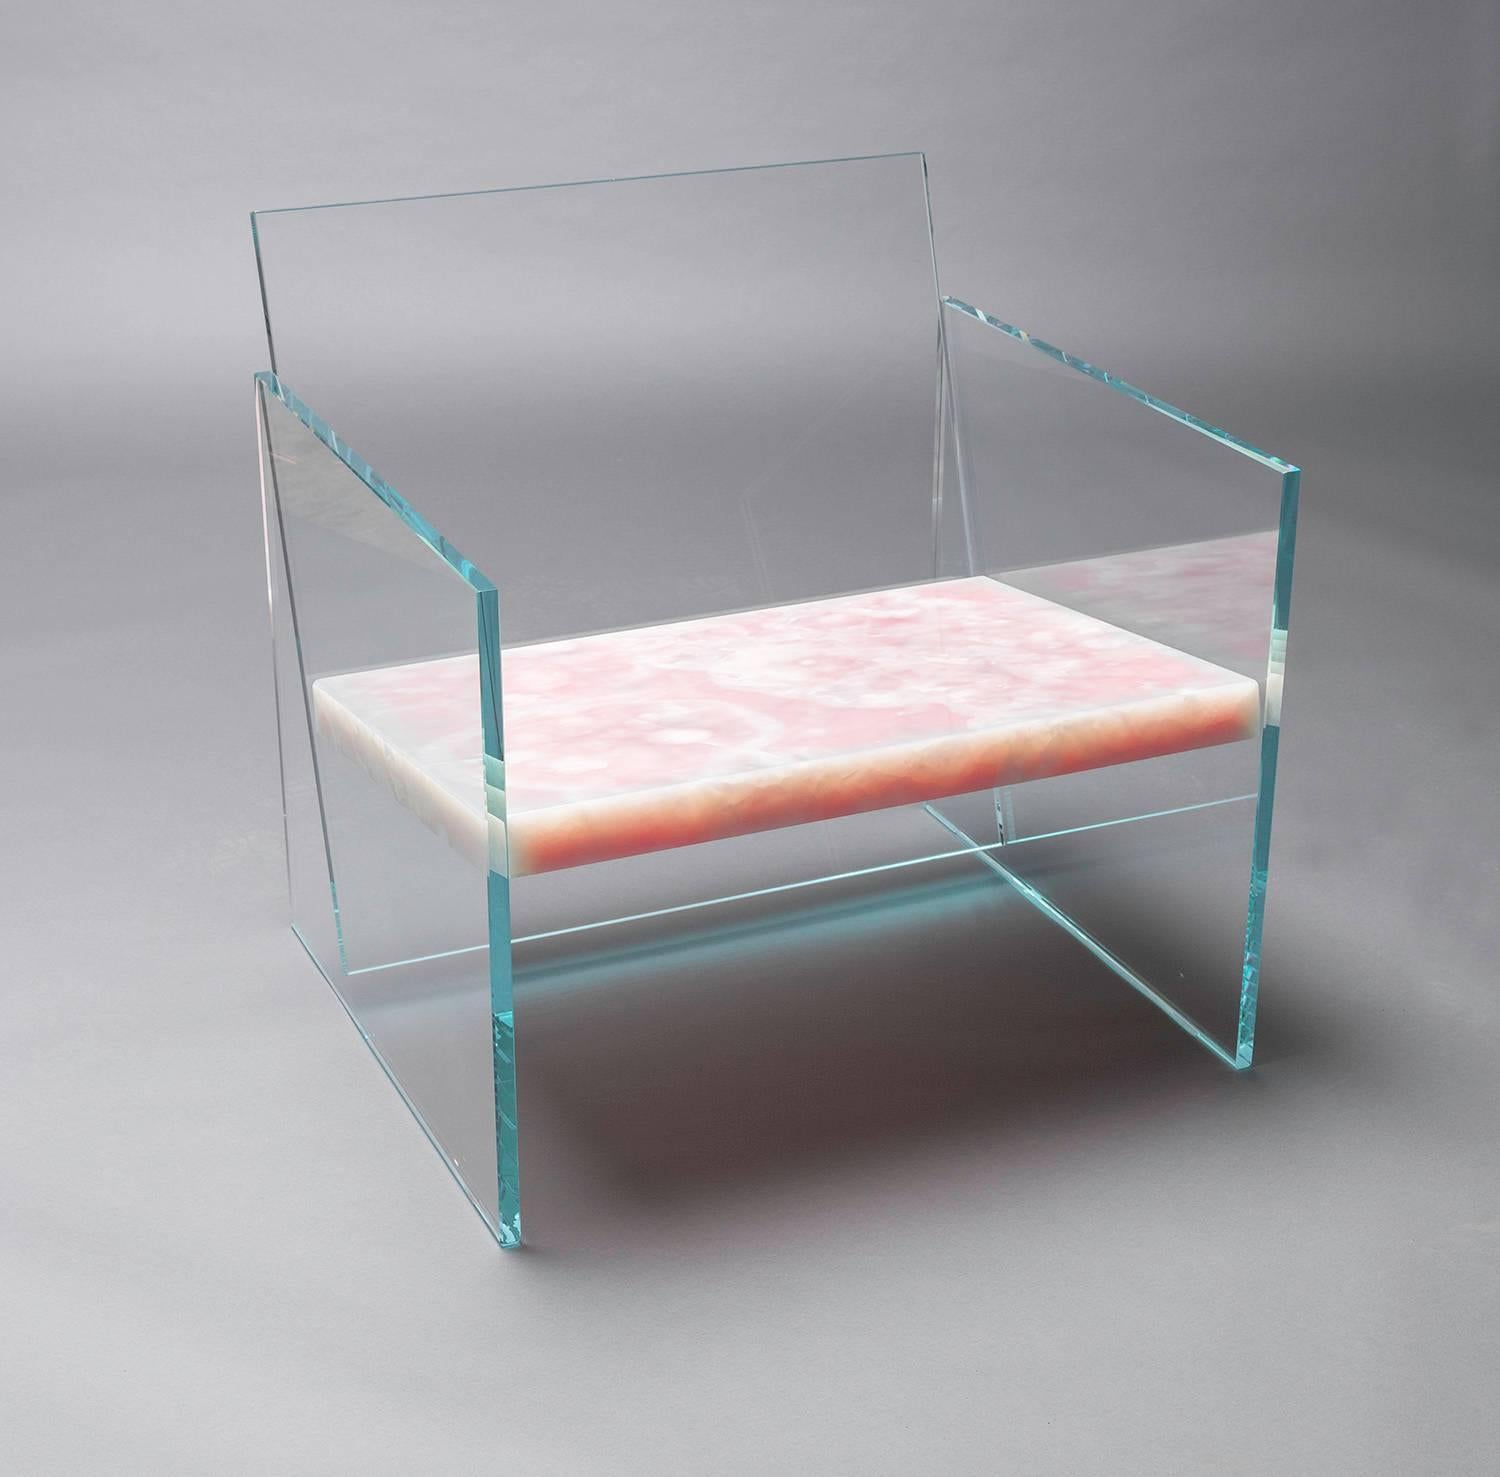 Lounge chair in 3/4" ultra clear tempered glass with 2"1/4 laminated onyx slab. The chair uses no
hardware or mechanical fasteners and is assembled using only UV bonding. Each piece has been
stamped and numbered and comes with a